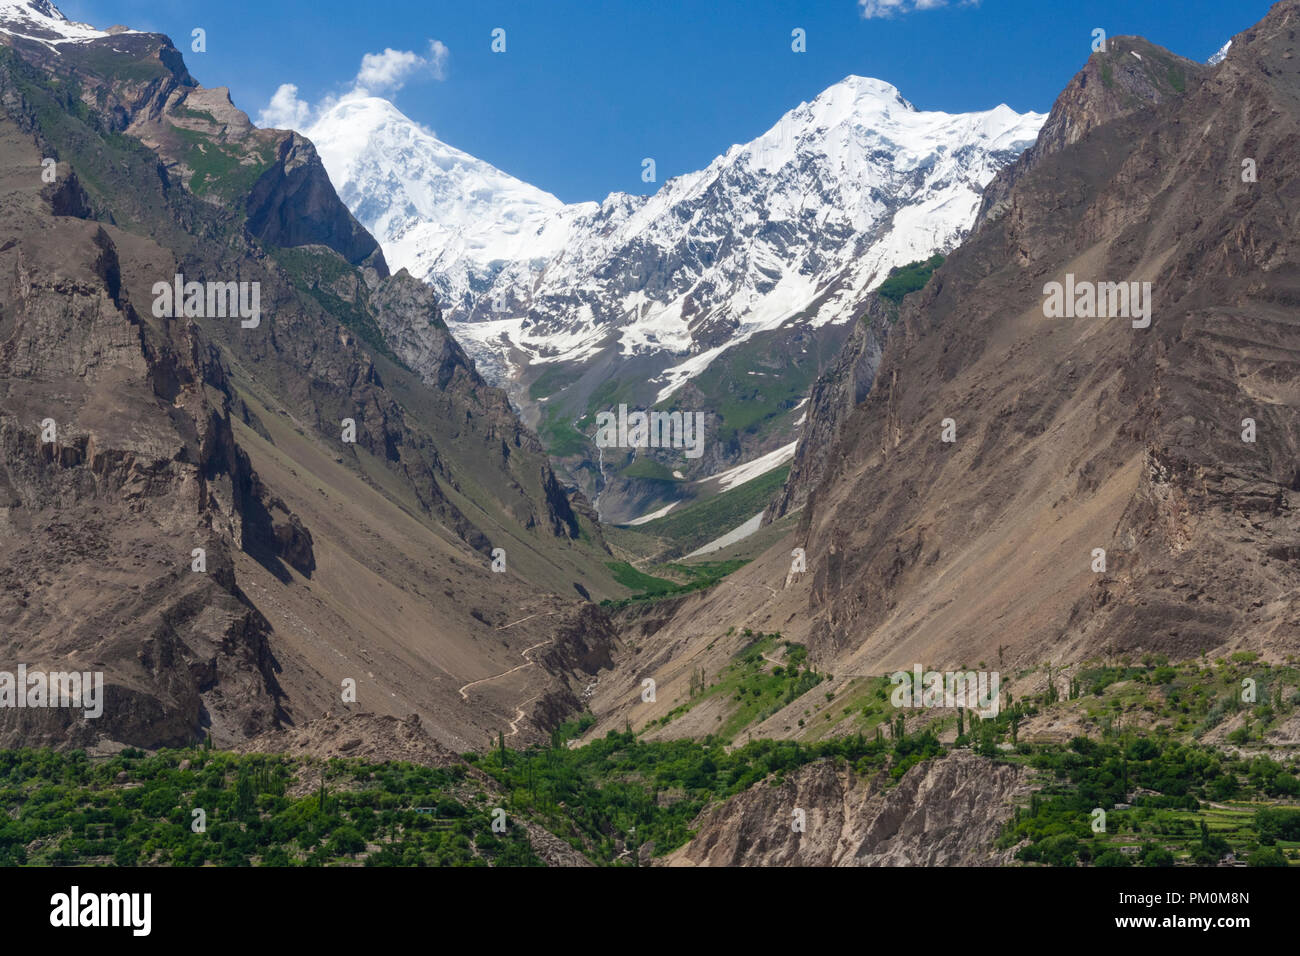 Karimabad, Hunza Valley, Gilgit-Baltistan, Pakistan : Hunza, a mountainous valley in far north Pakistan, bordering with the Wakhan Corridor in Afghani Stock Photo